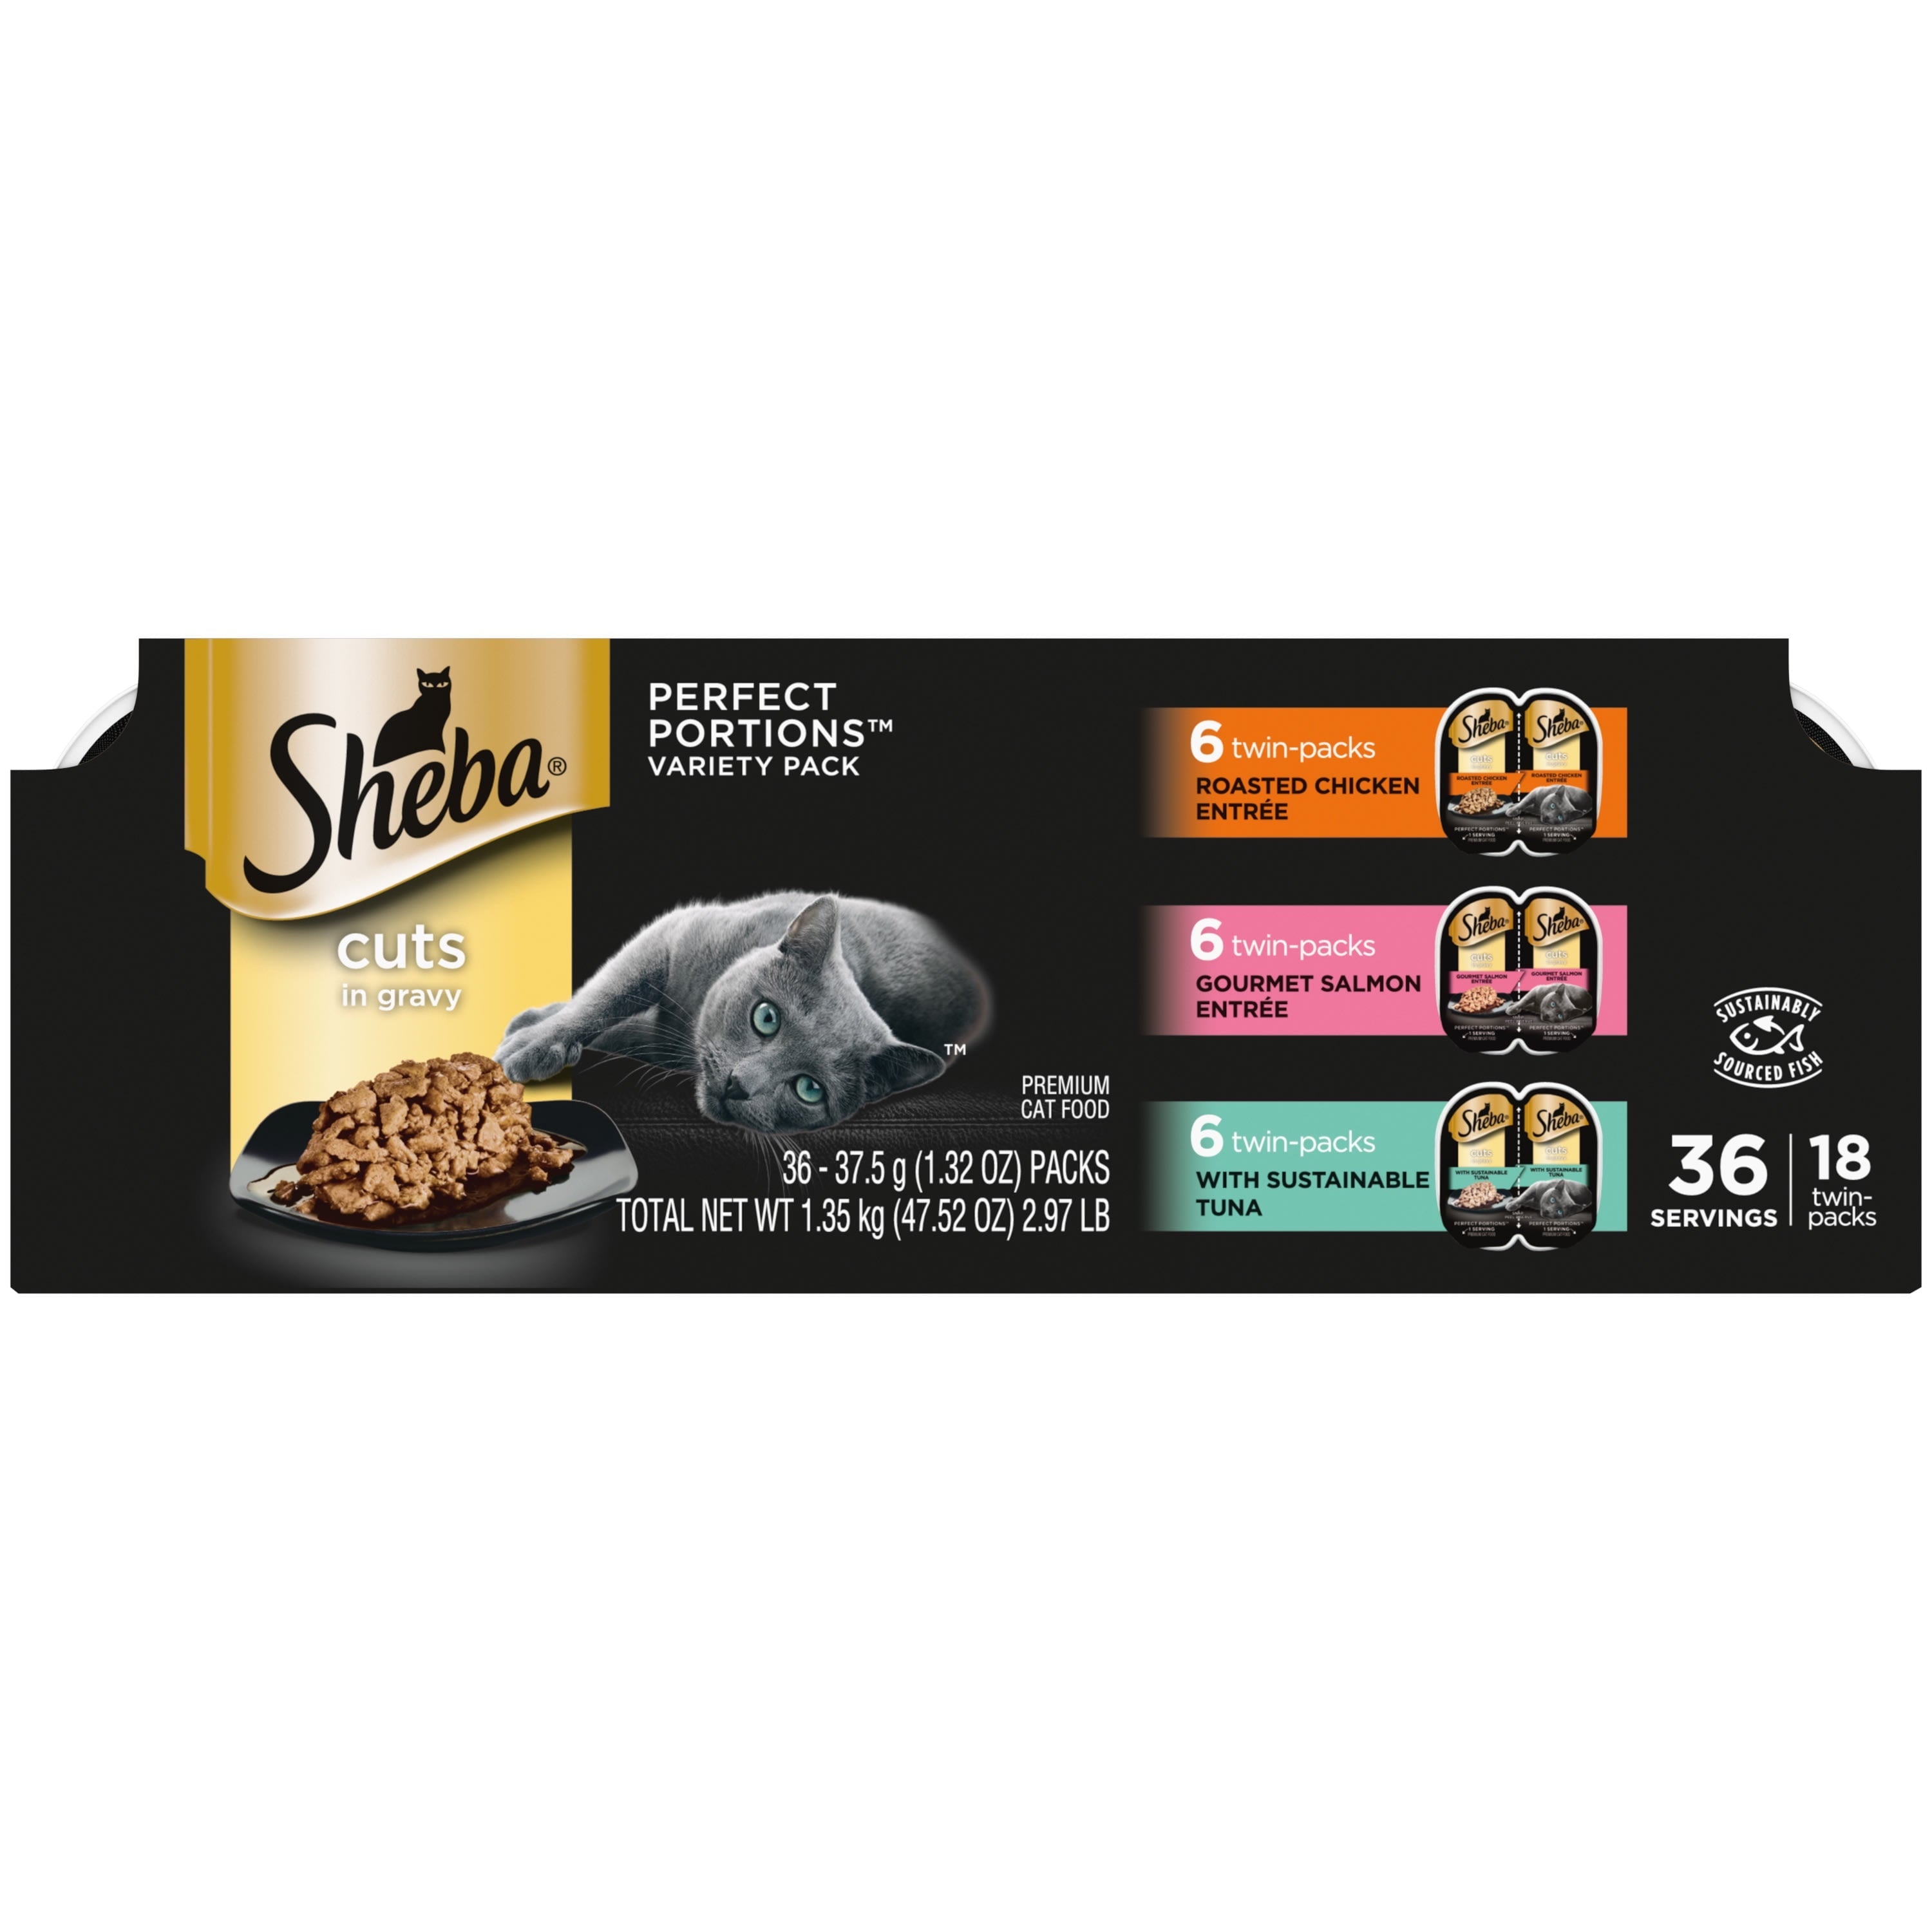 Wholesale prices with free shipping all over United States SHEBA Wet Cat Food Cuts in Gravy Variety Pack, With Sustainable Tuna and Roasted Chicken Entree and Gourmet Salmon Entree, (18) 2.6 oz. PERFECT PORTIONS Twin-Pack Trays - Steven Deals